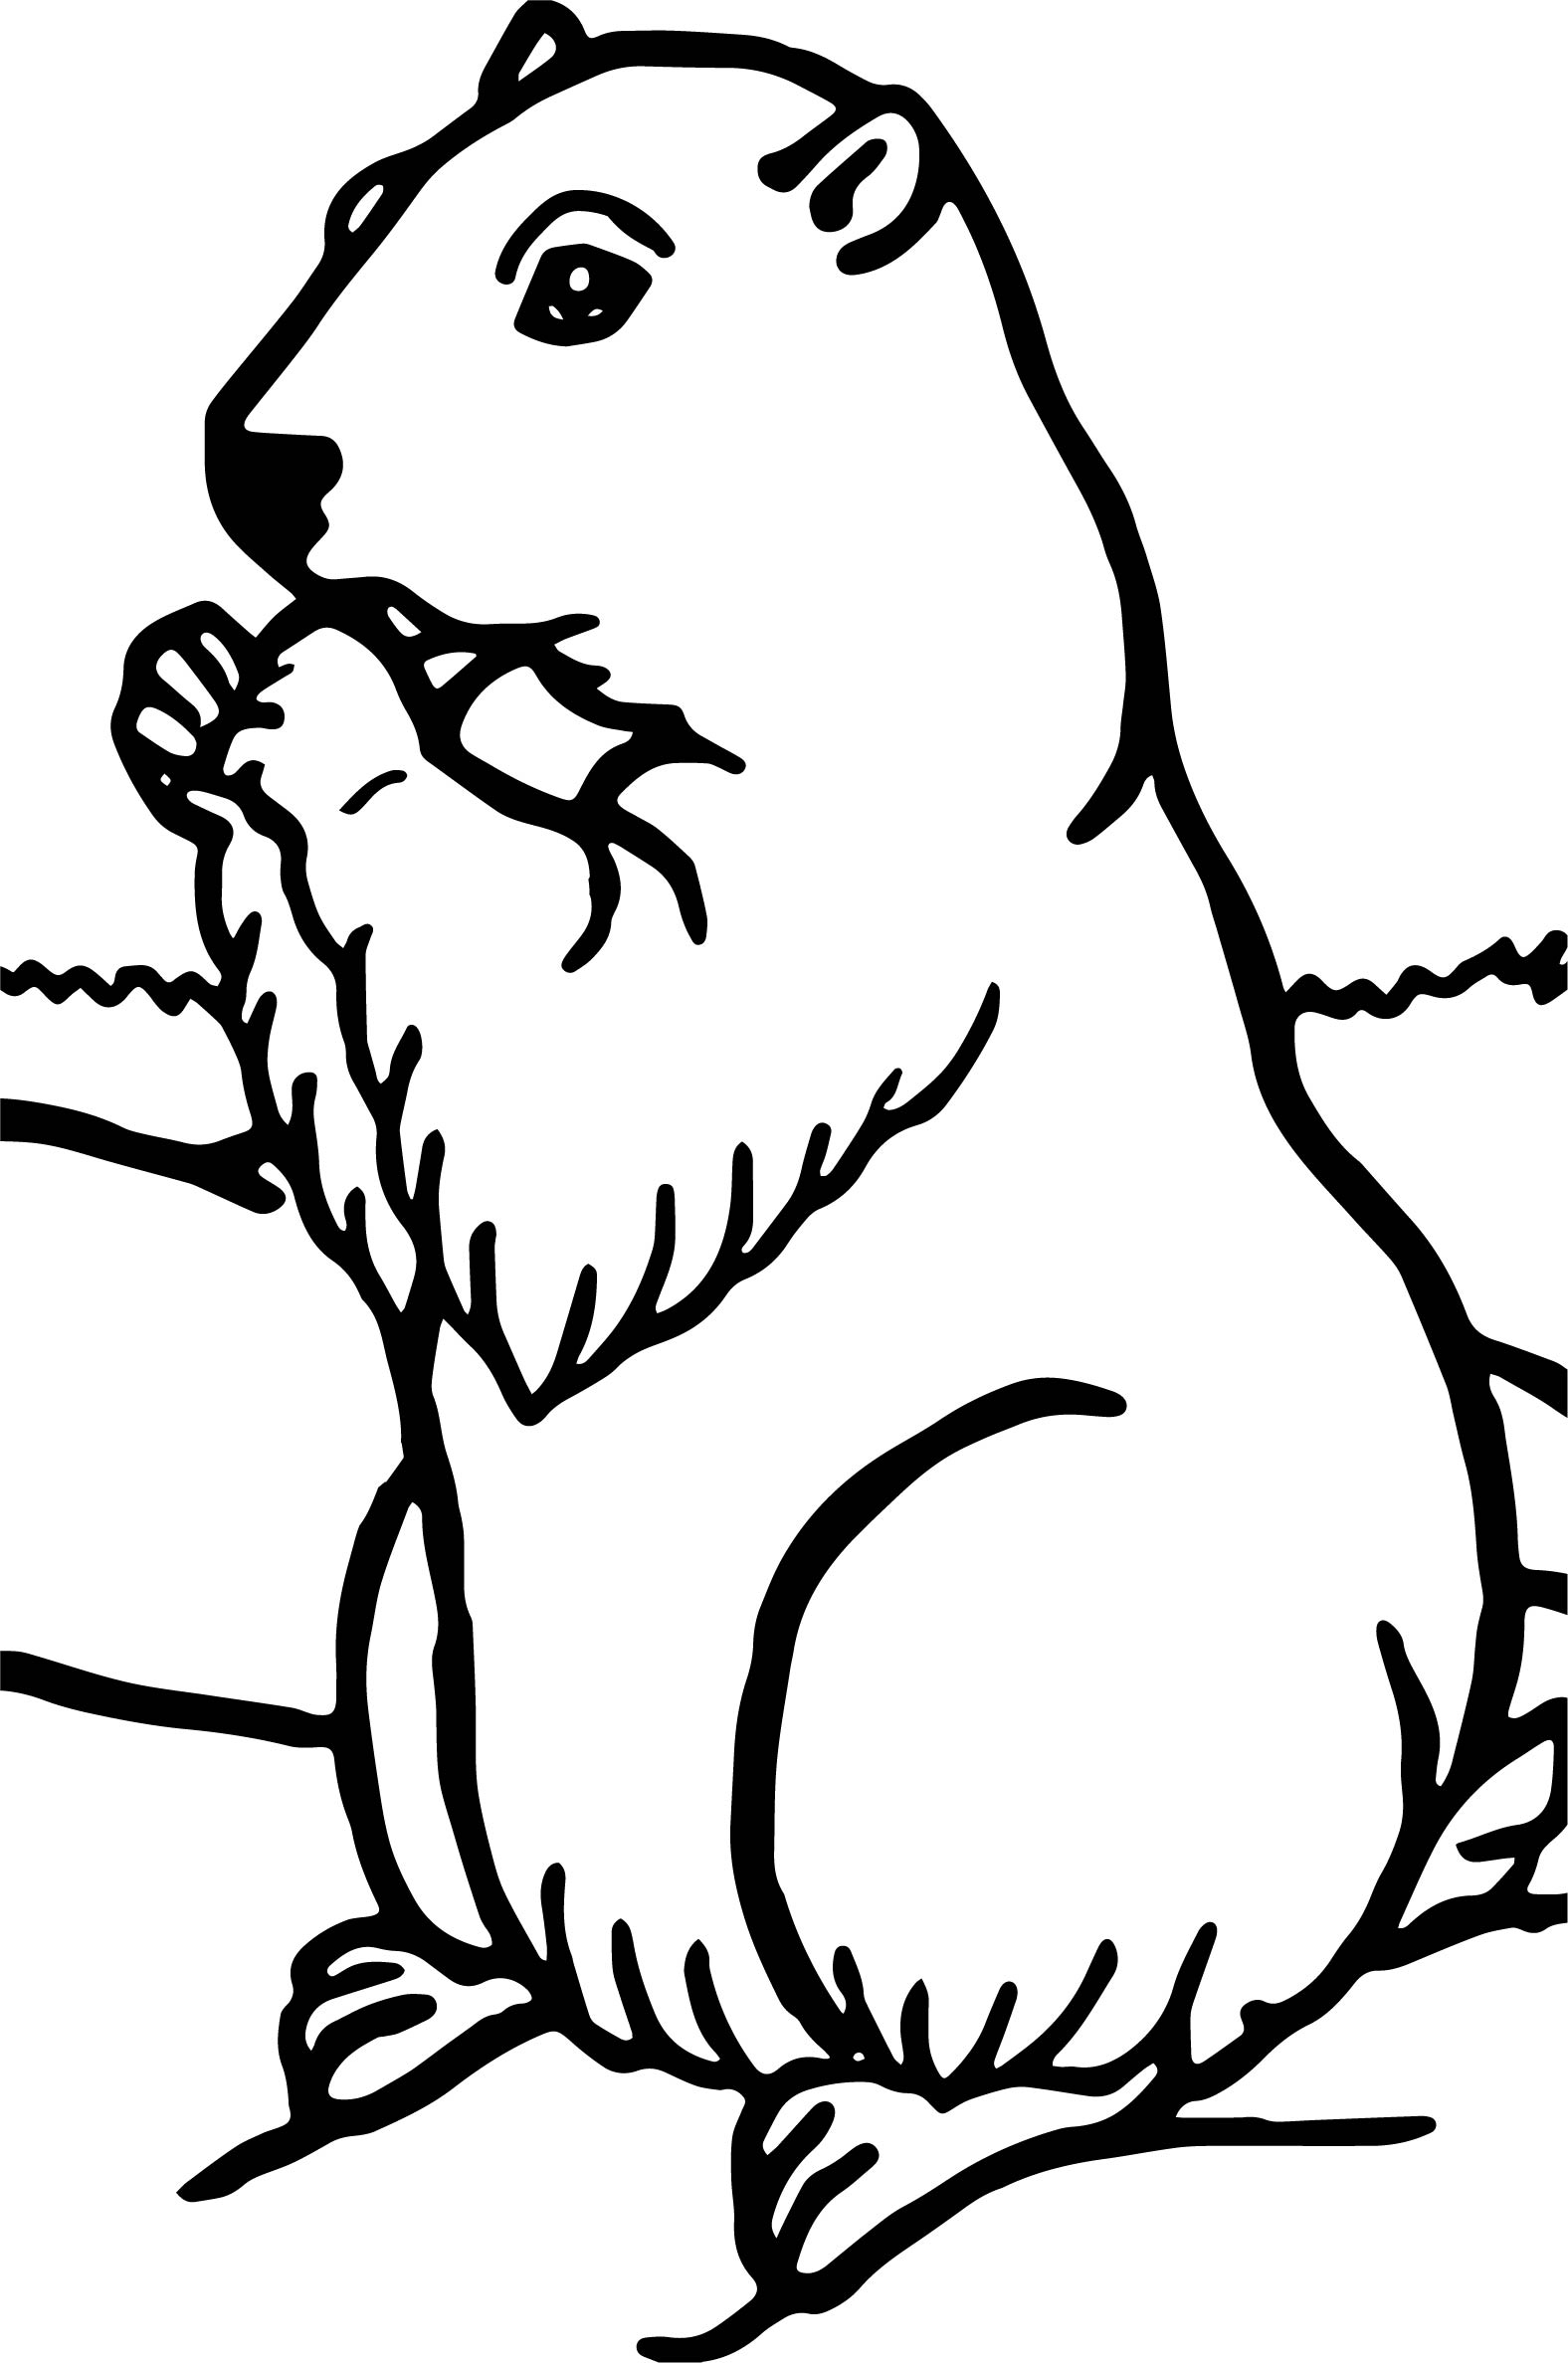 Download Groundhog Coloring Pages - Best Coloring Pages For Kids